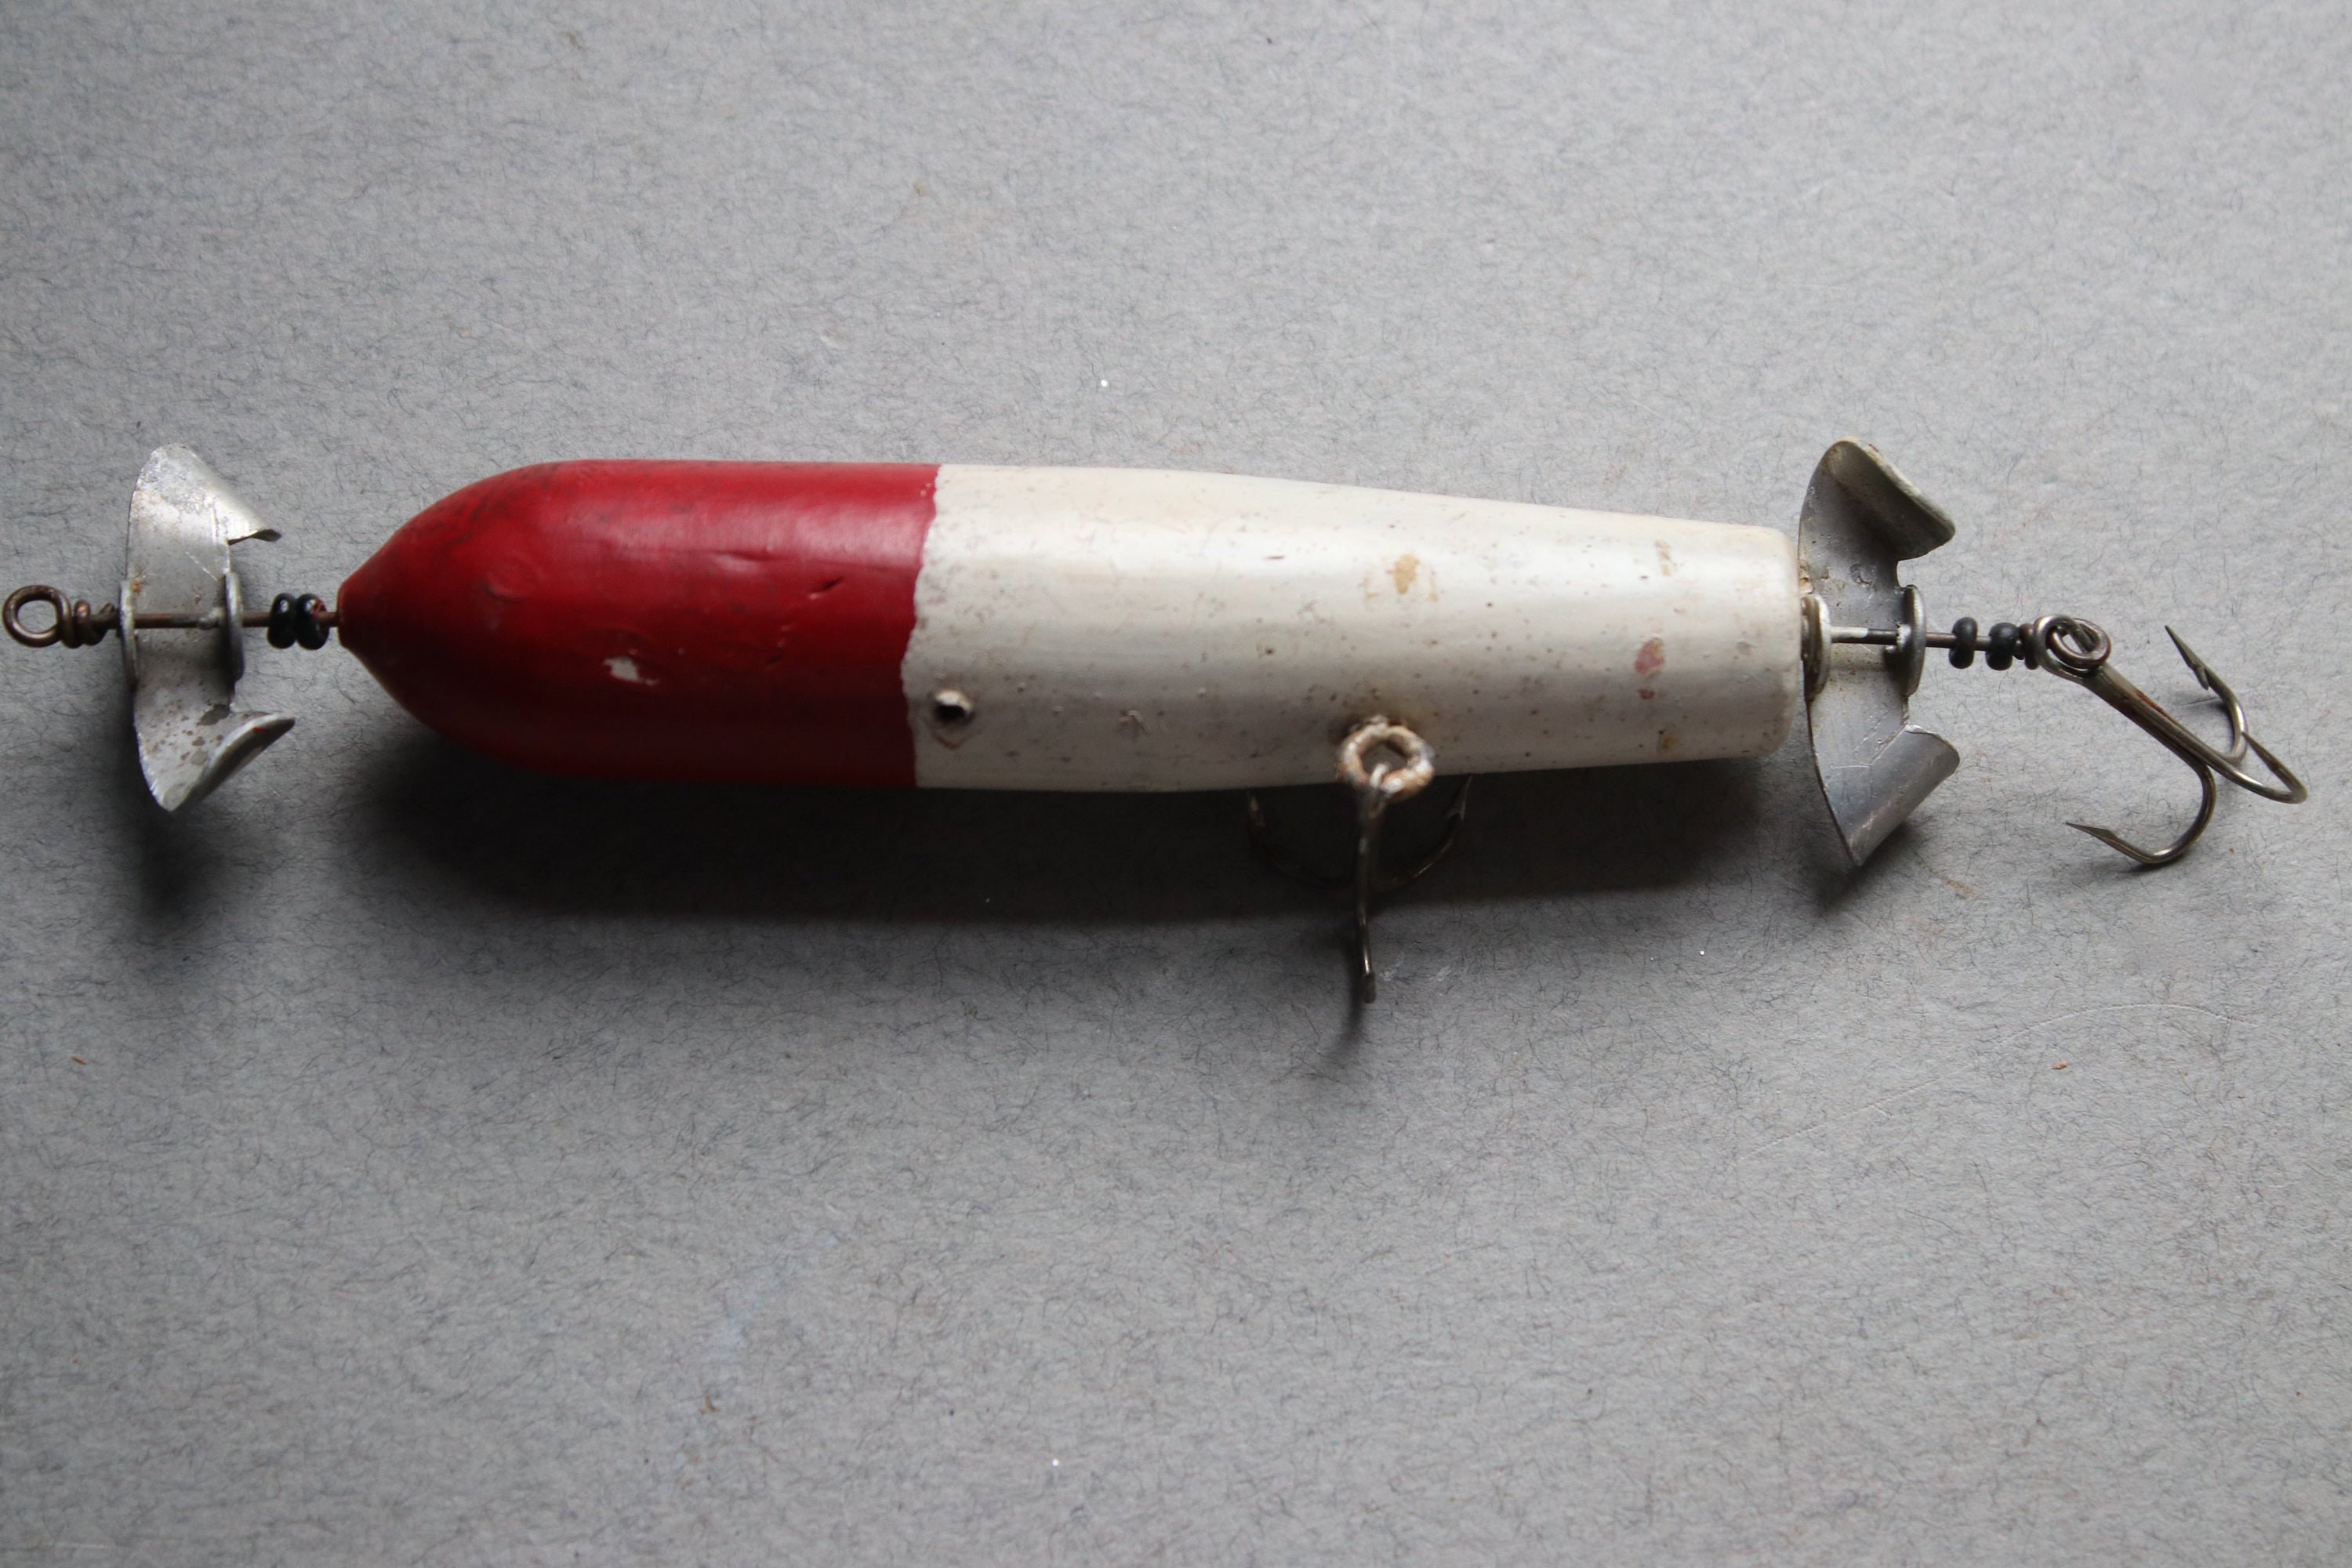 Vintage Red and White, Wooden Fishing Lure